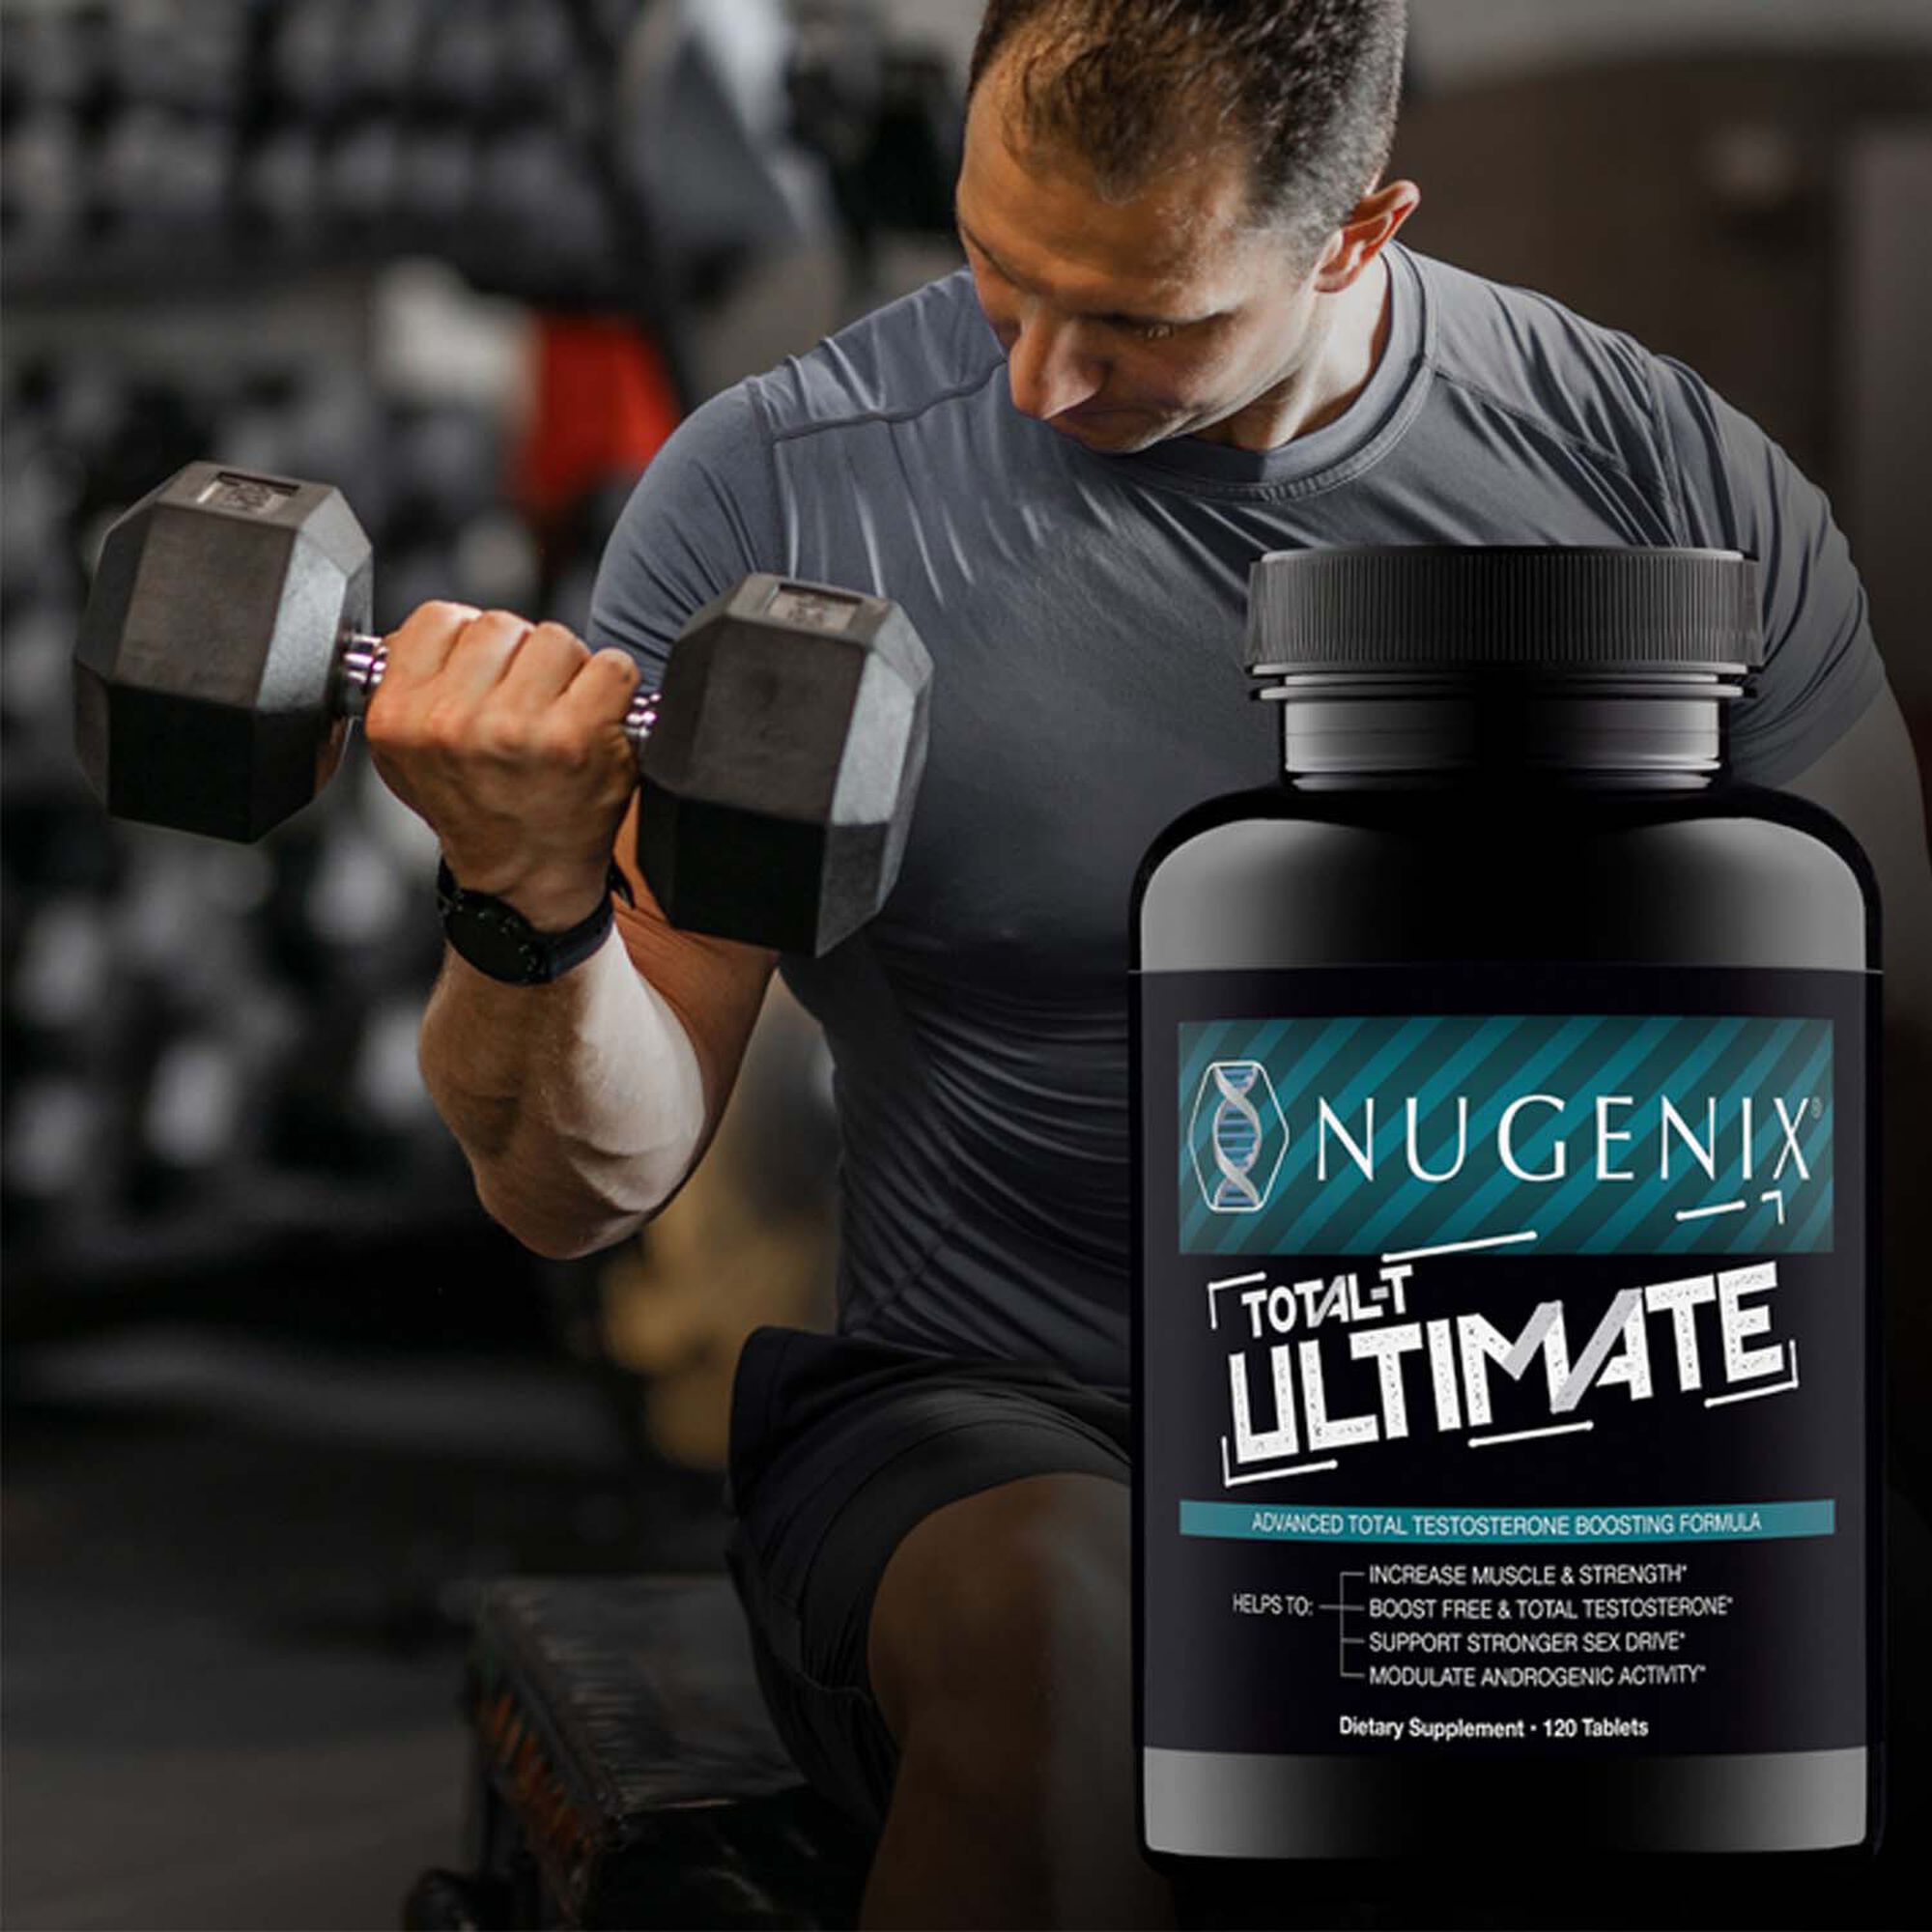 452409 Nugenix® Helps to increase muscle & strength*, boost free